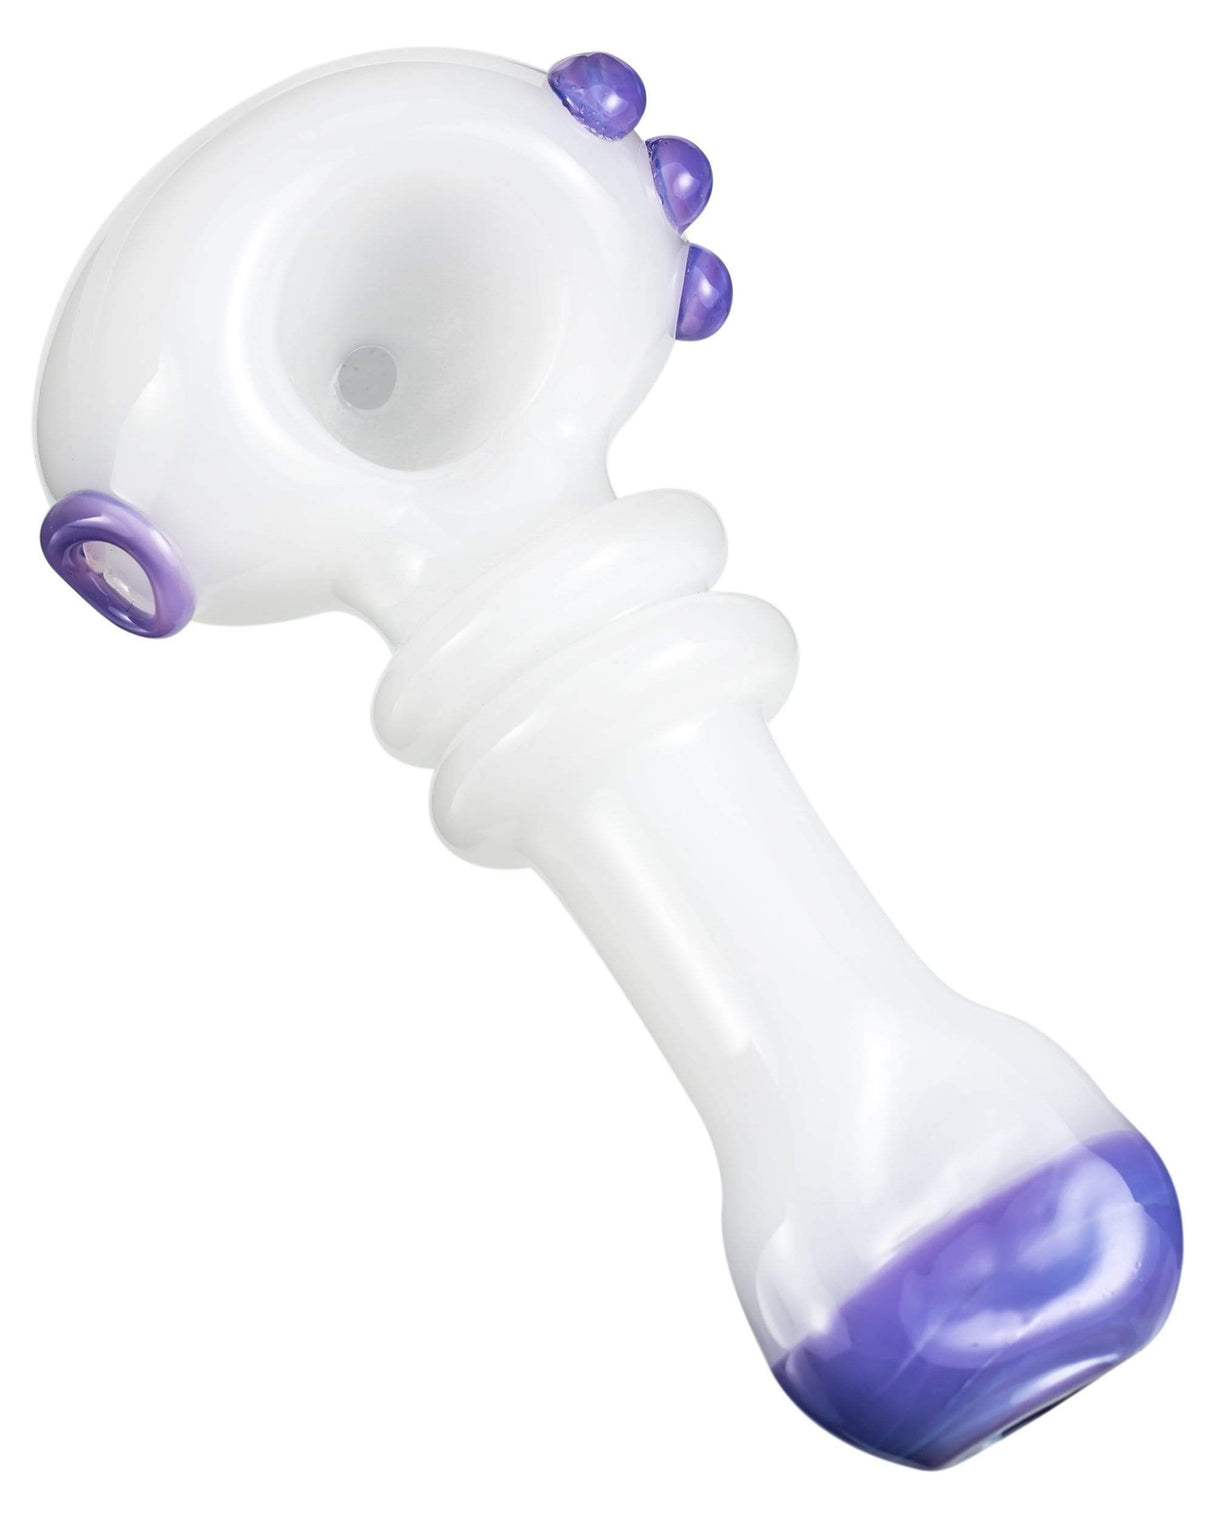 Customizable Maria Spoon Pipe by Valiant Distribution in Purple & White, Thick Glass, 4" Length